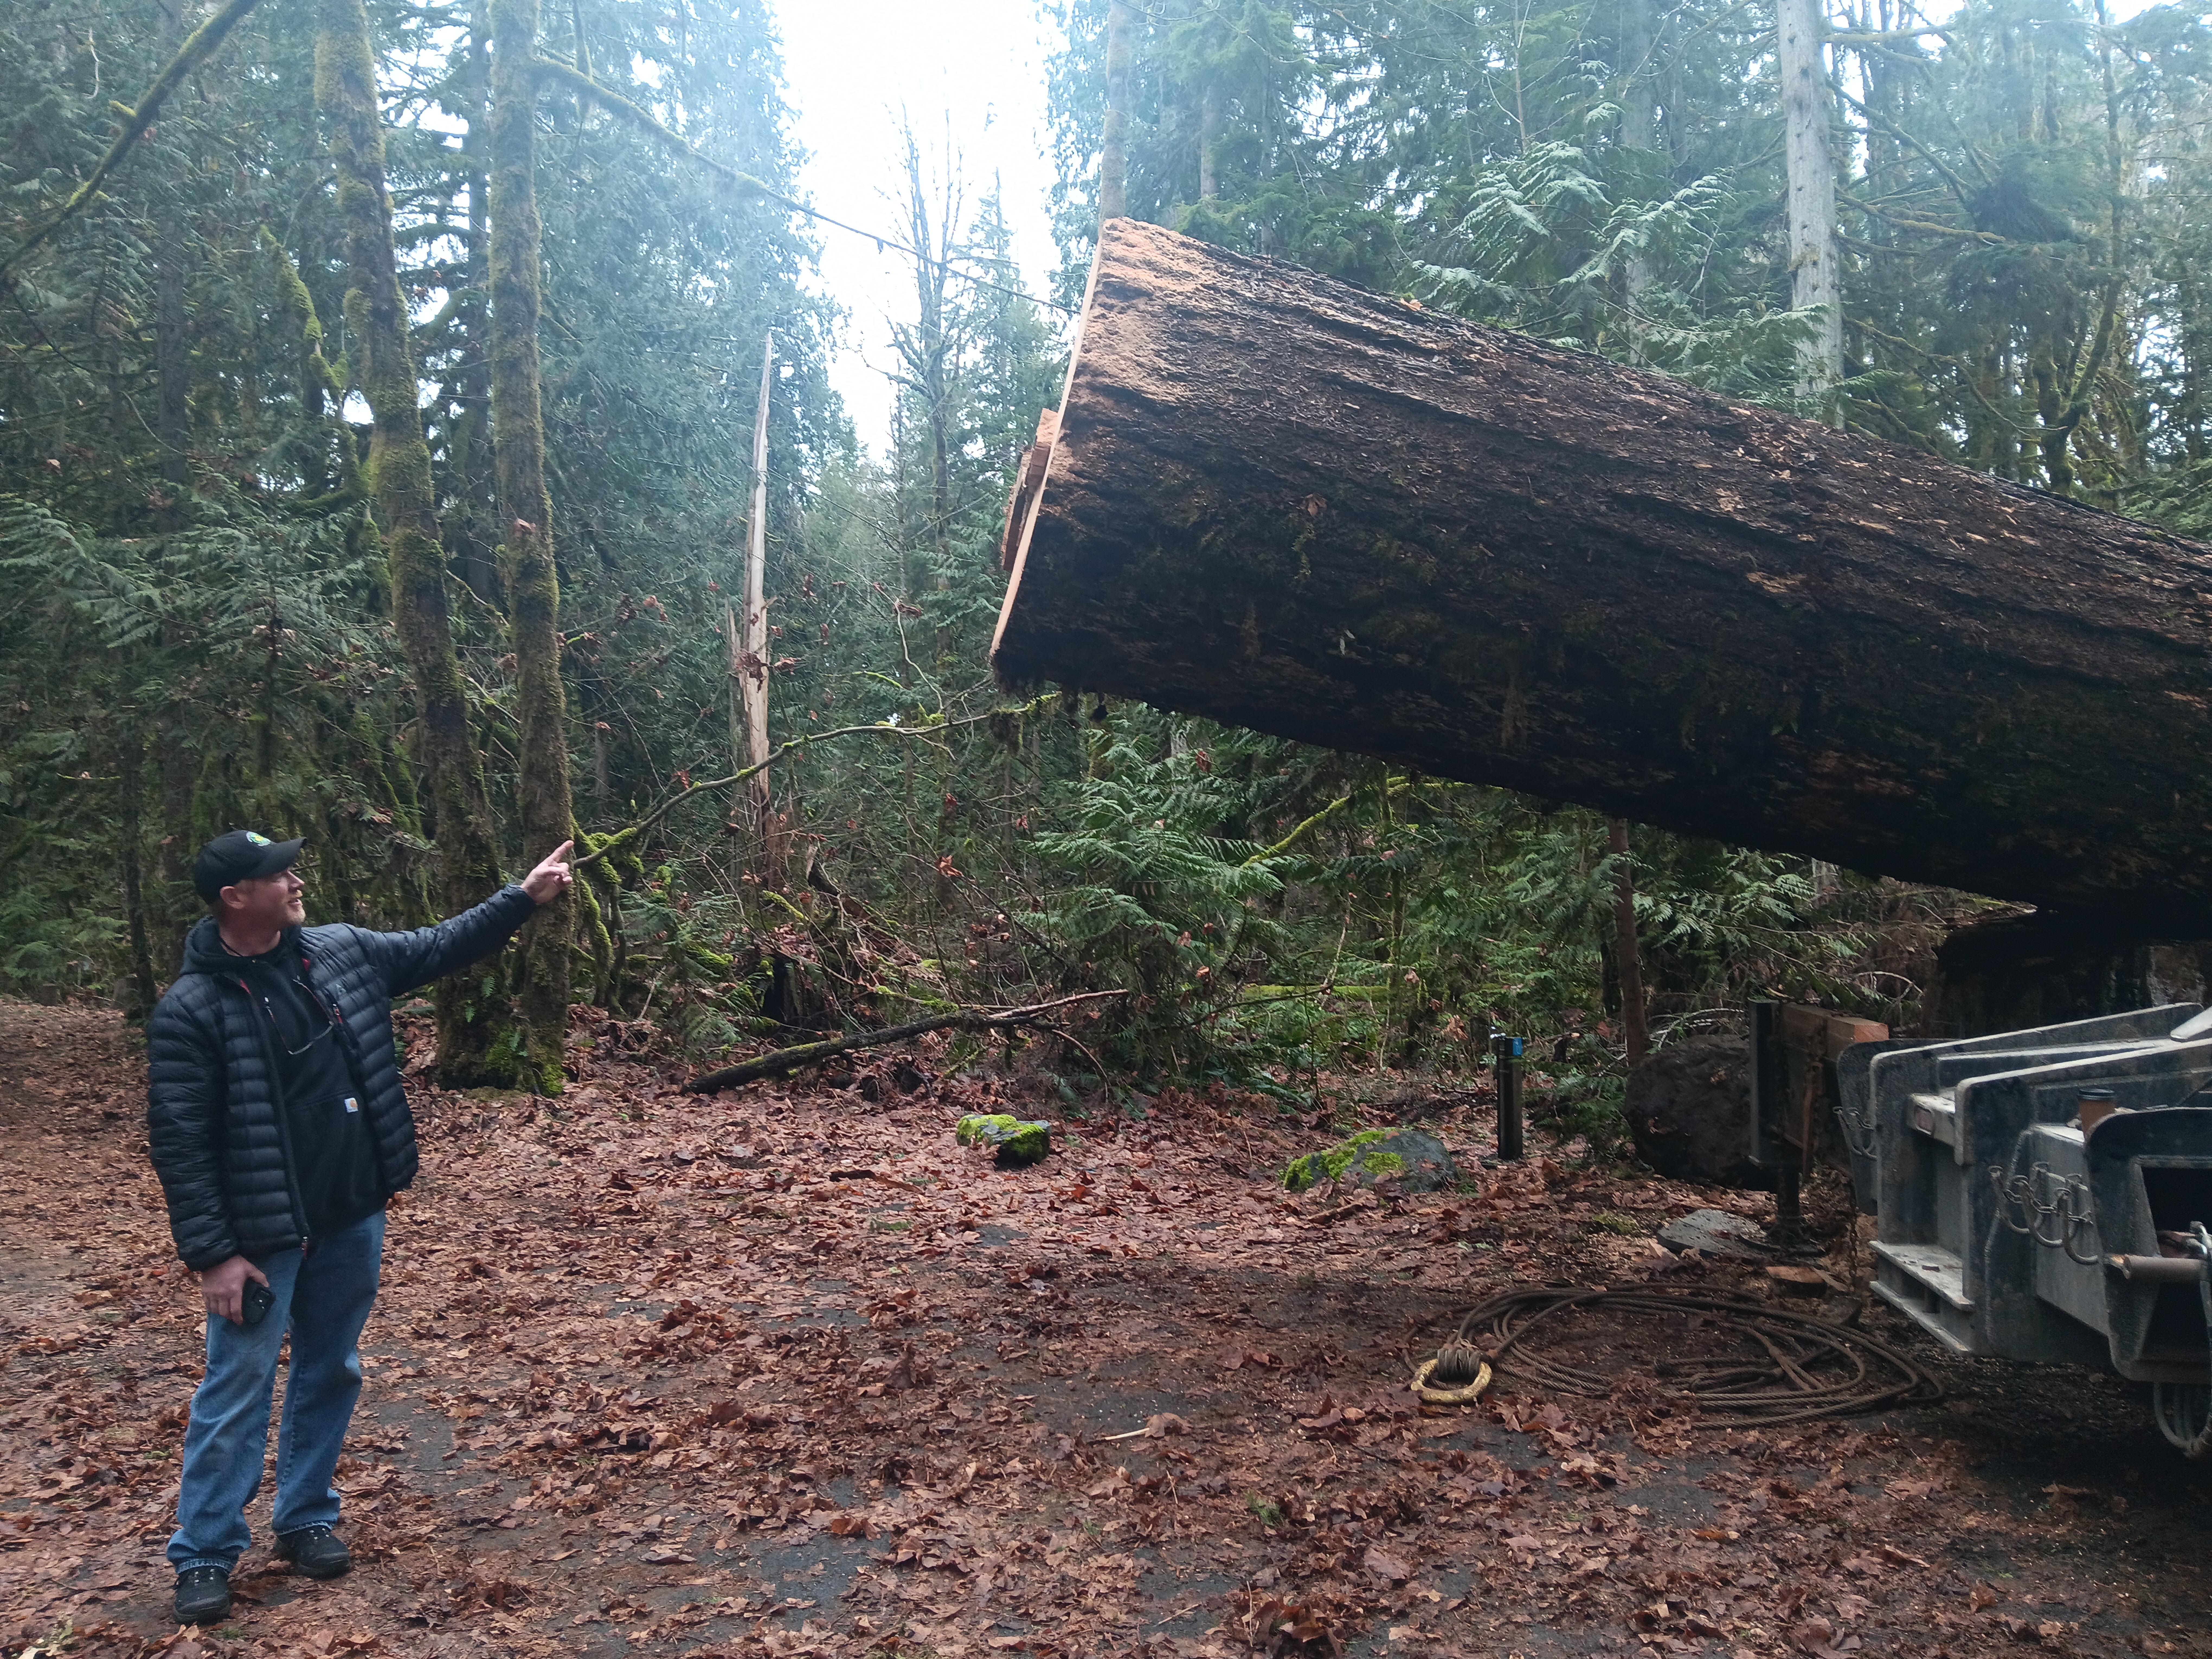 Ranger standing next to a loaded cedar for size comparison